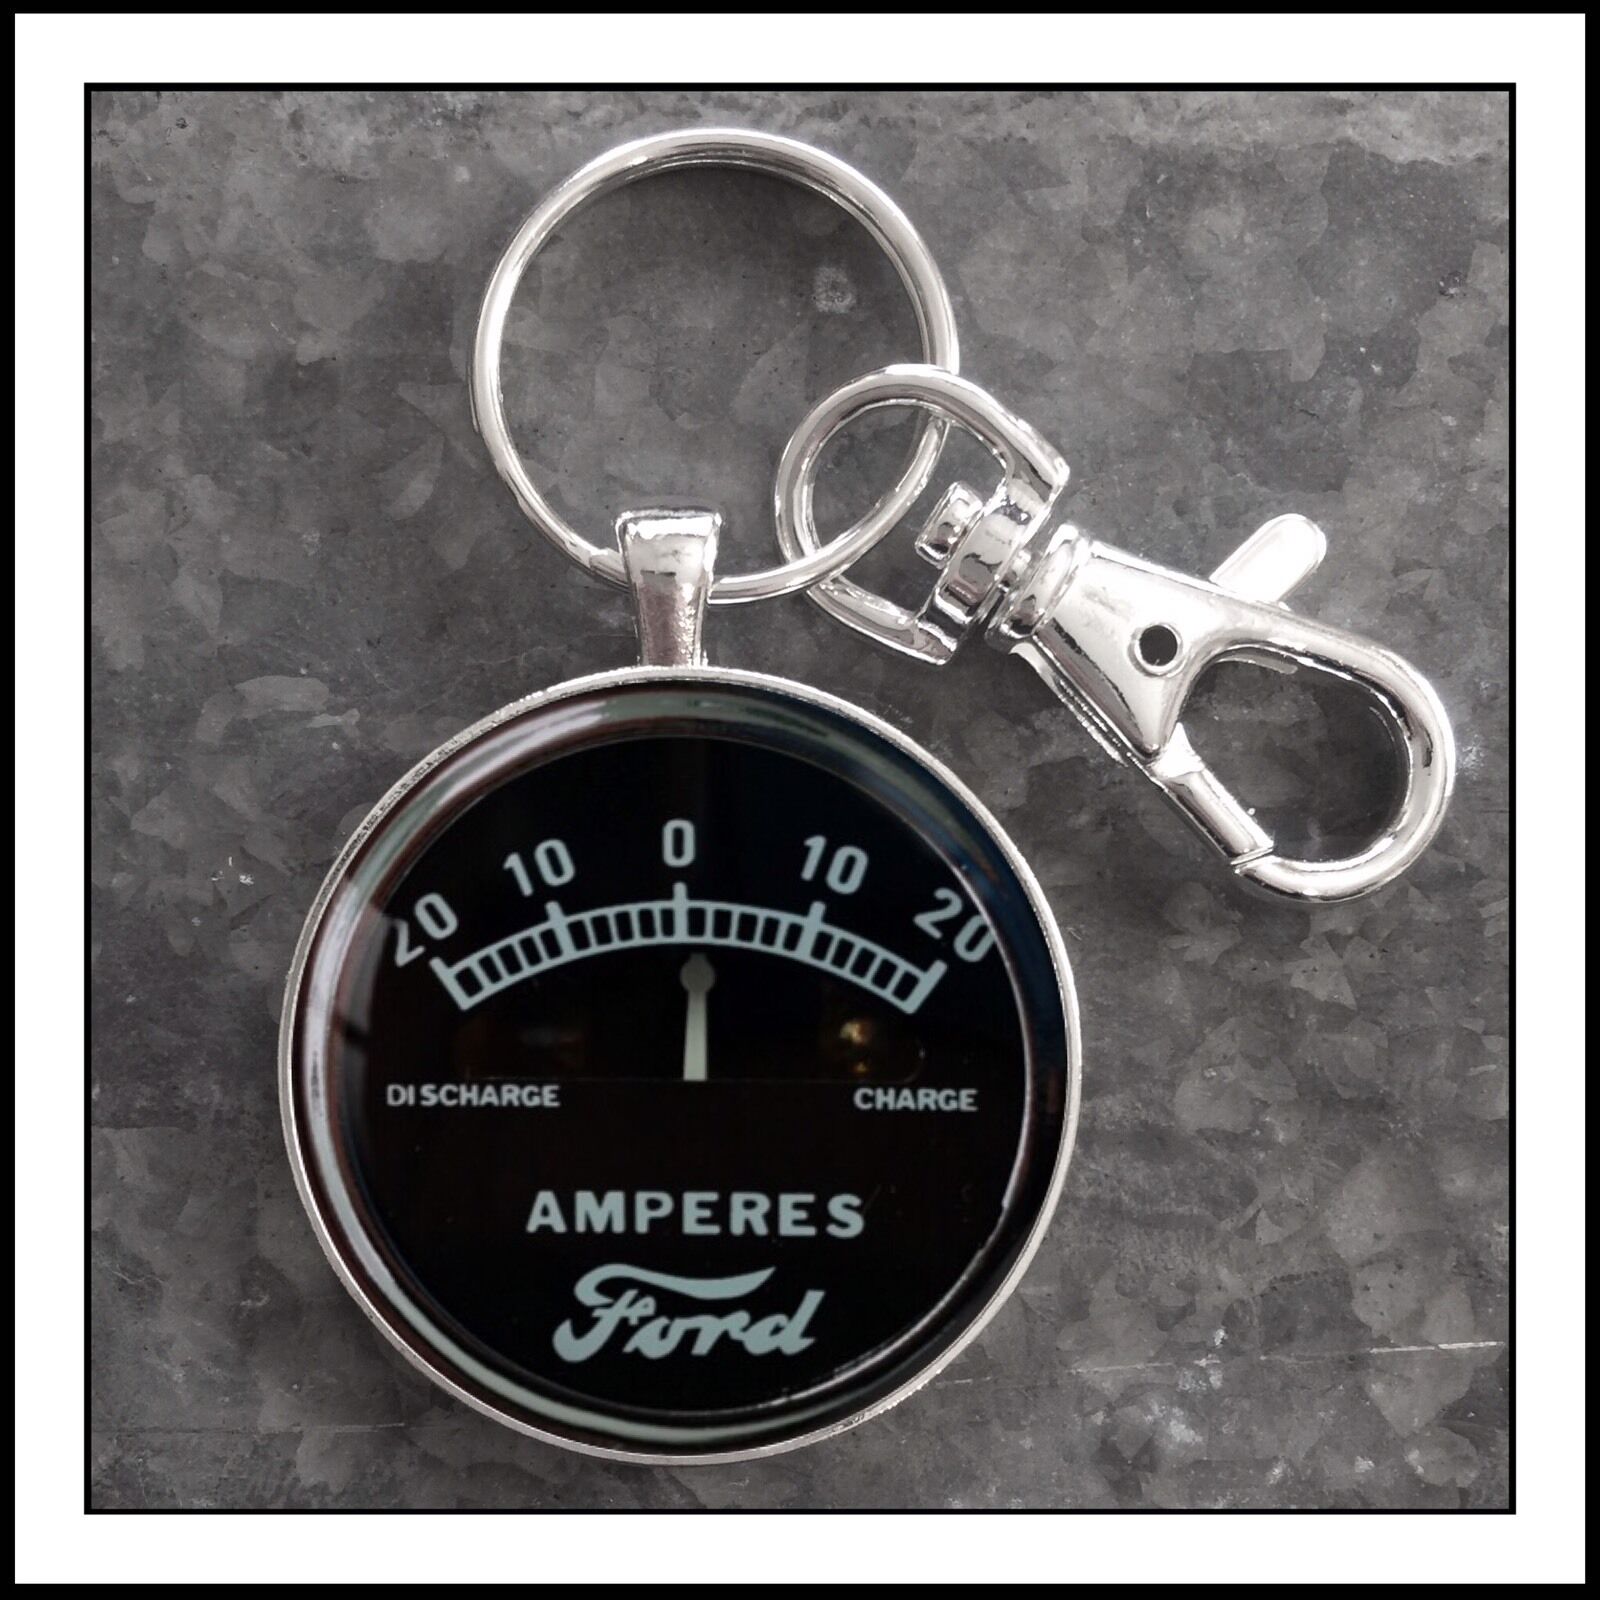 Ford Tractor Ammeter Photo Keychain Tractor Key Chain Gift 🎁